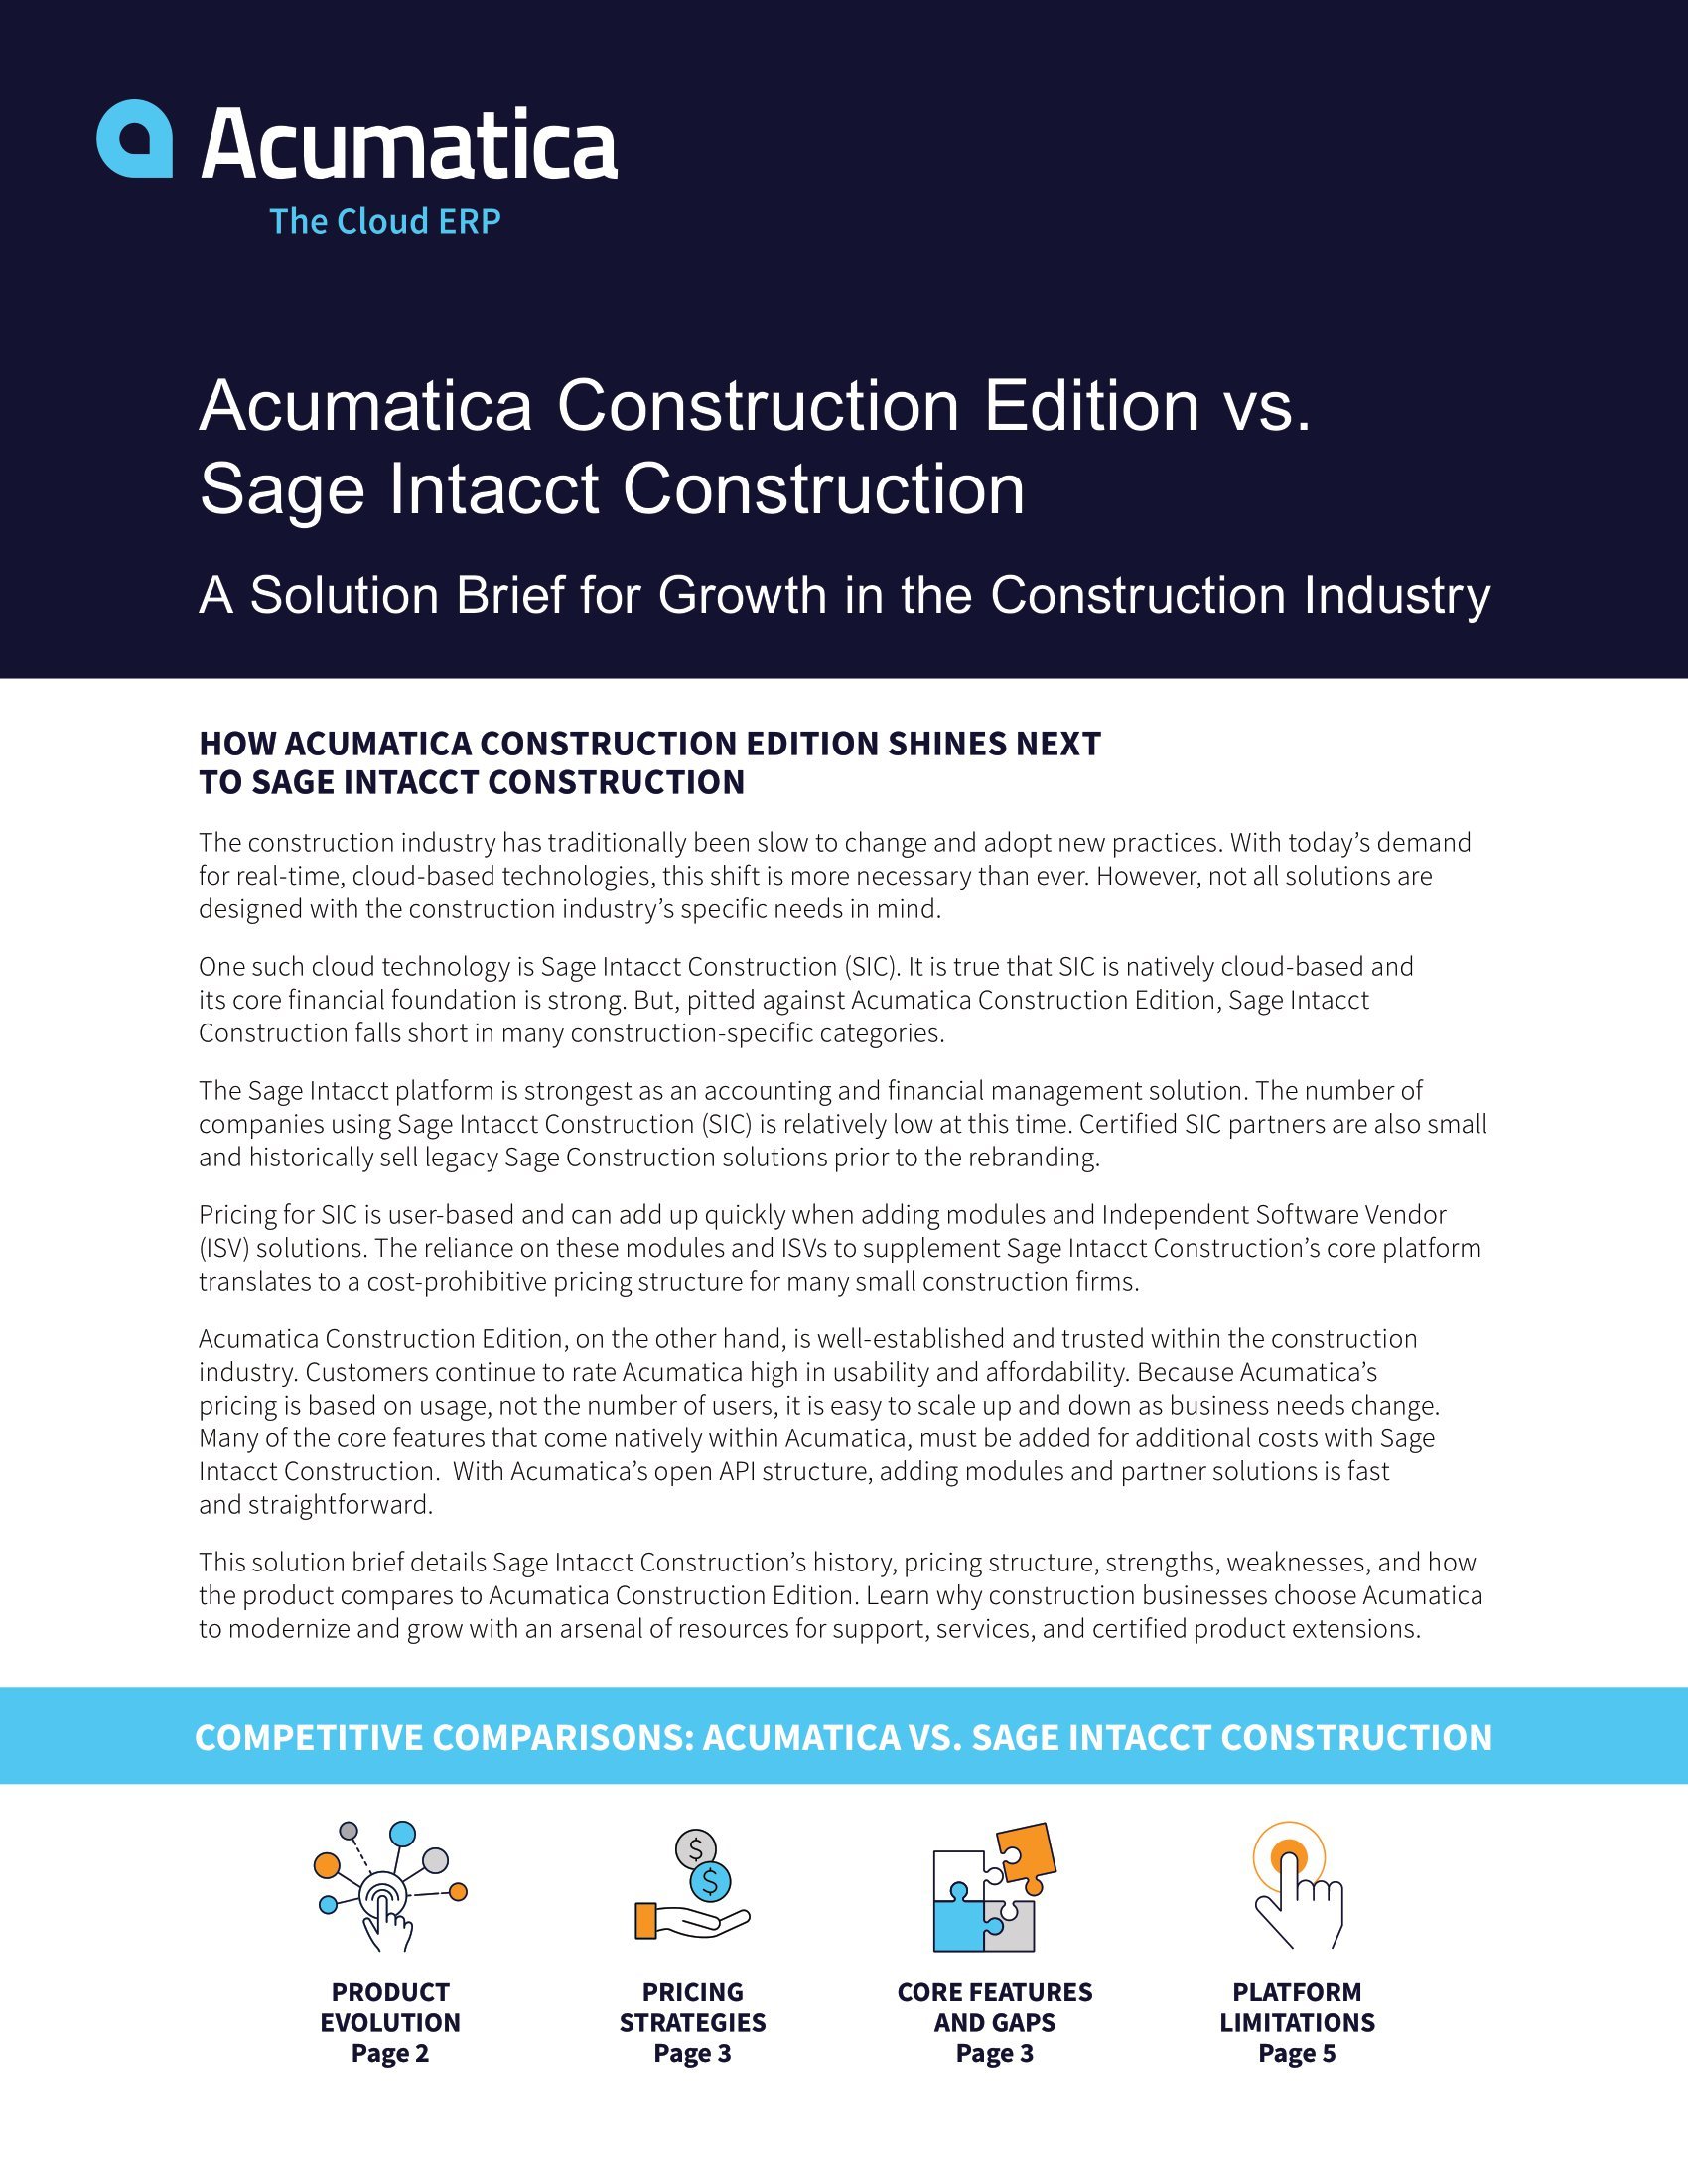 Comparing Acumatica Construction Edition to Sage Intacct Construction, page 0